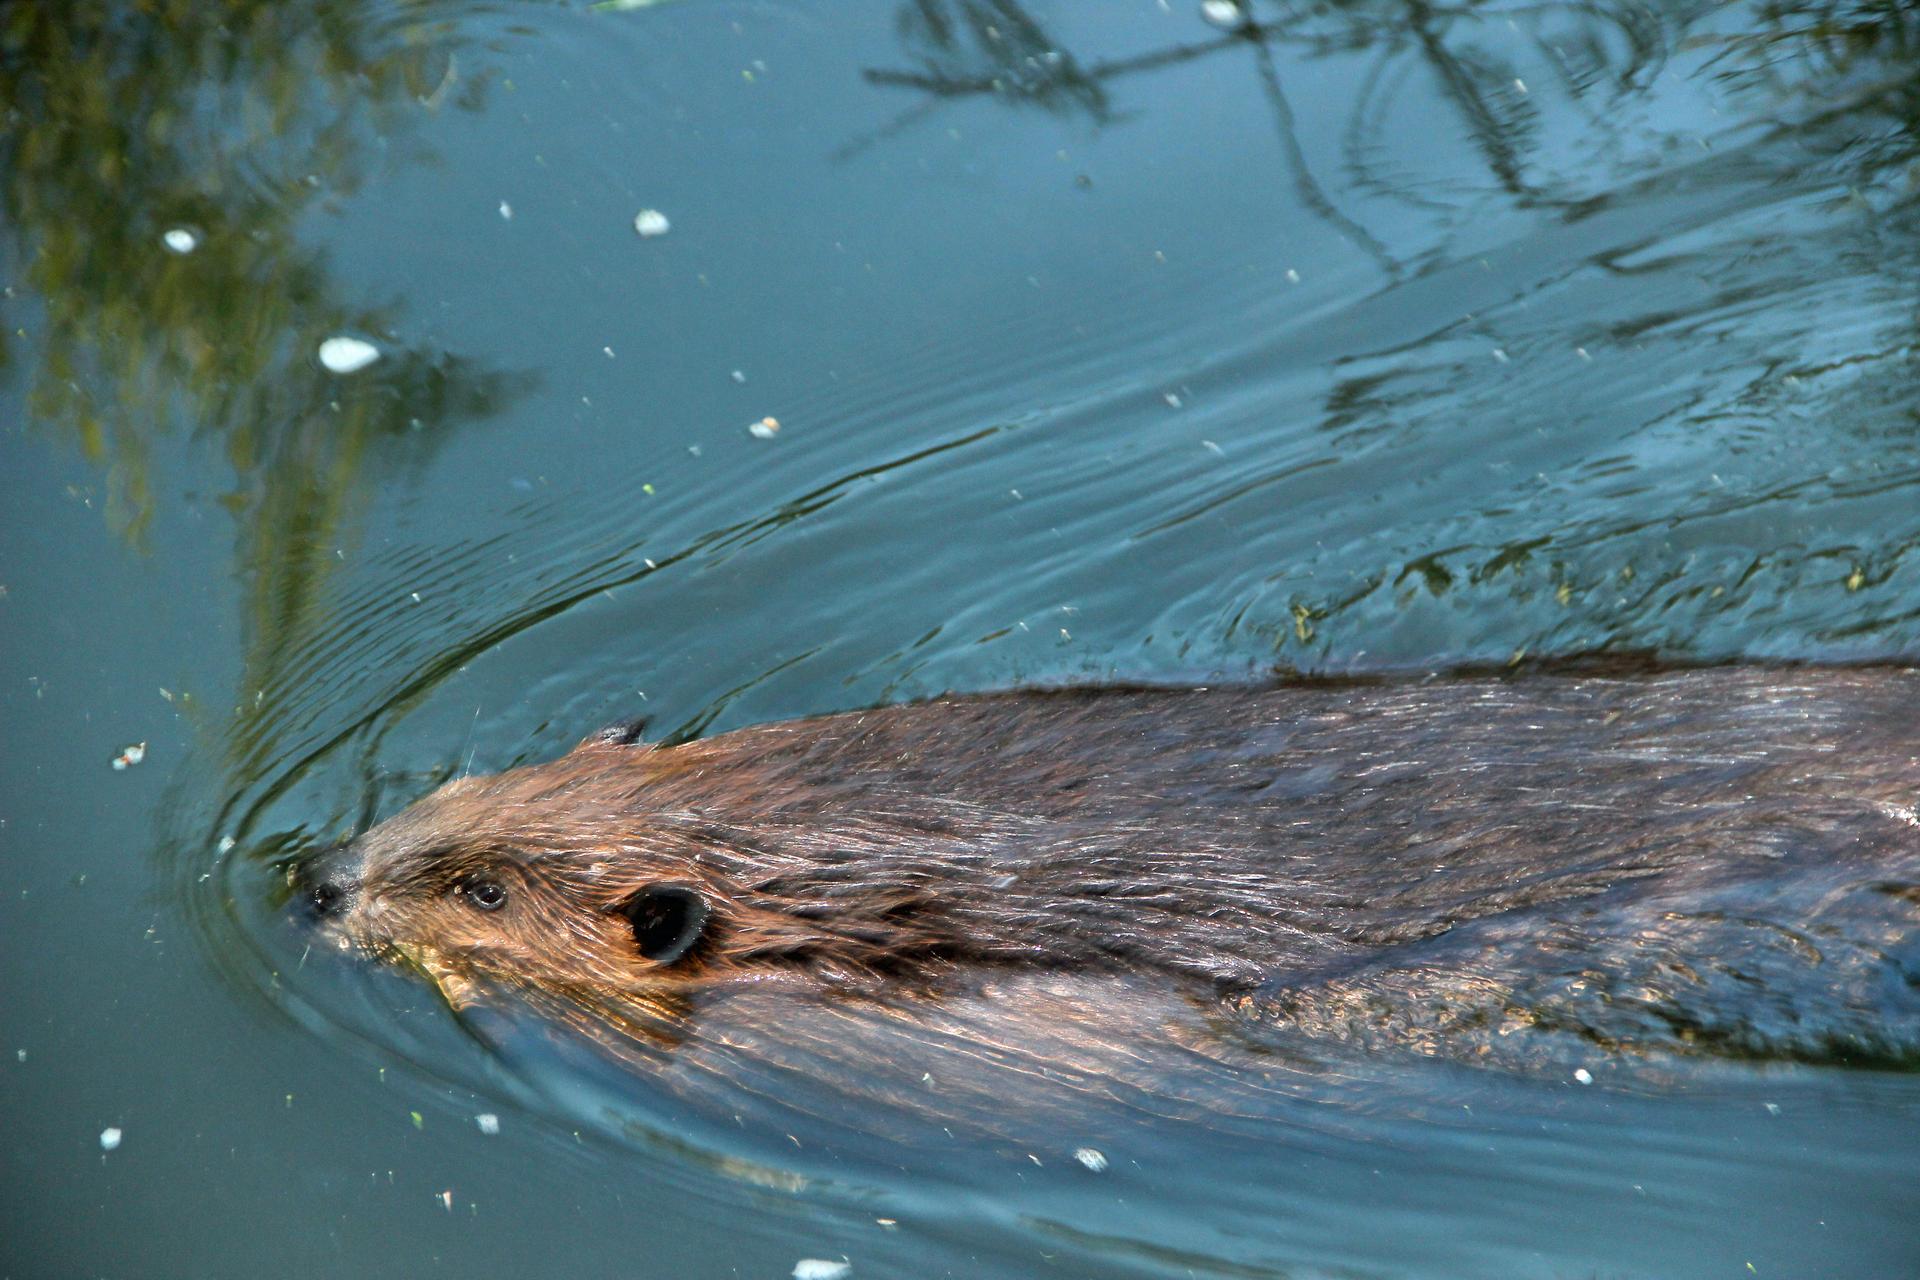 A beaver living in Vancouver's former Olympic Village